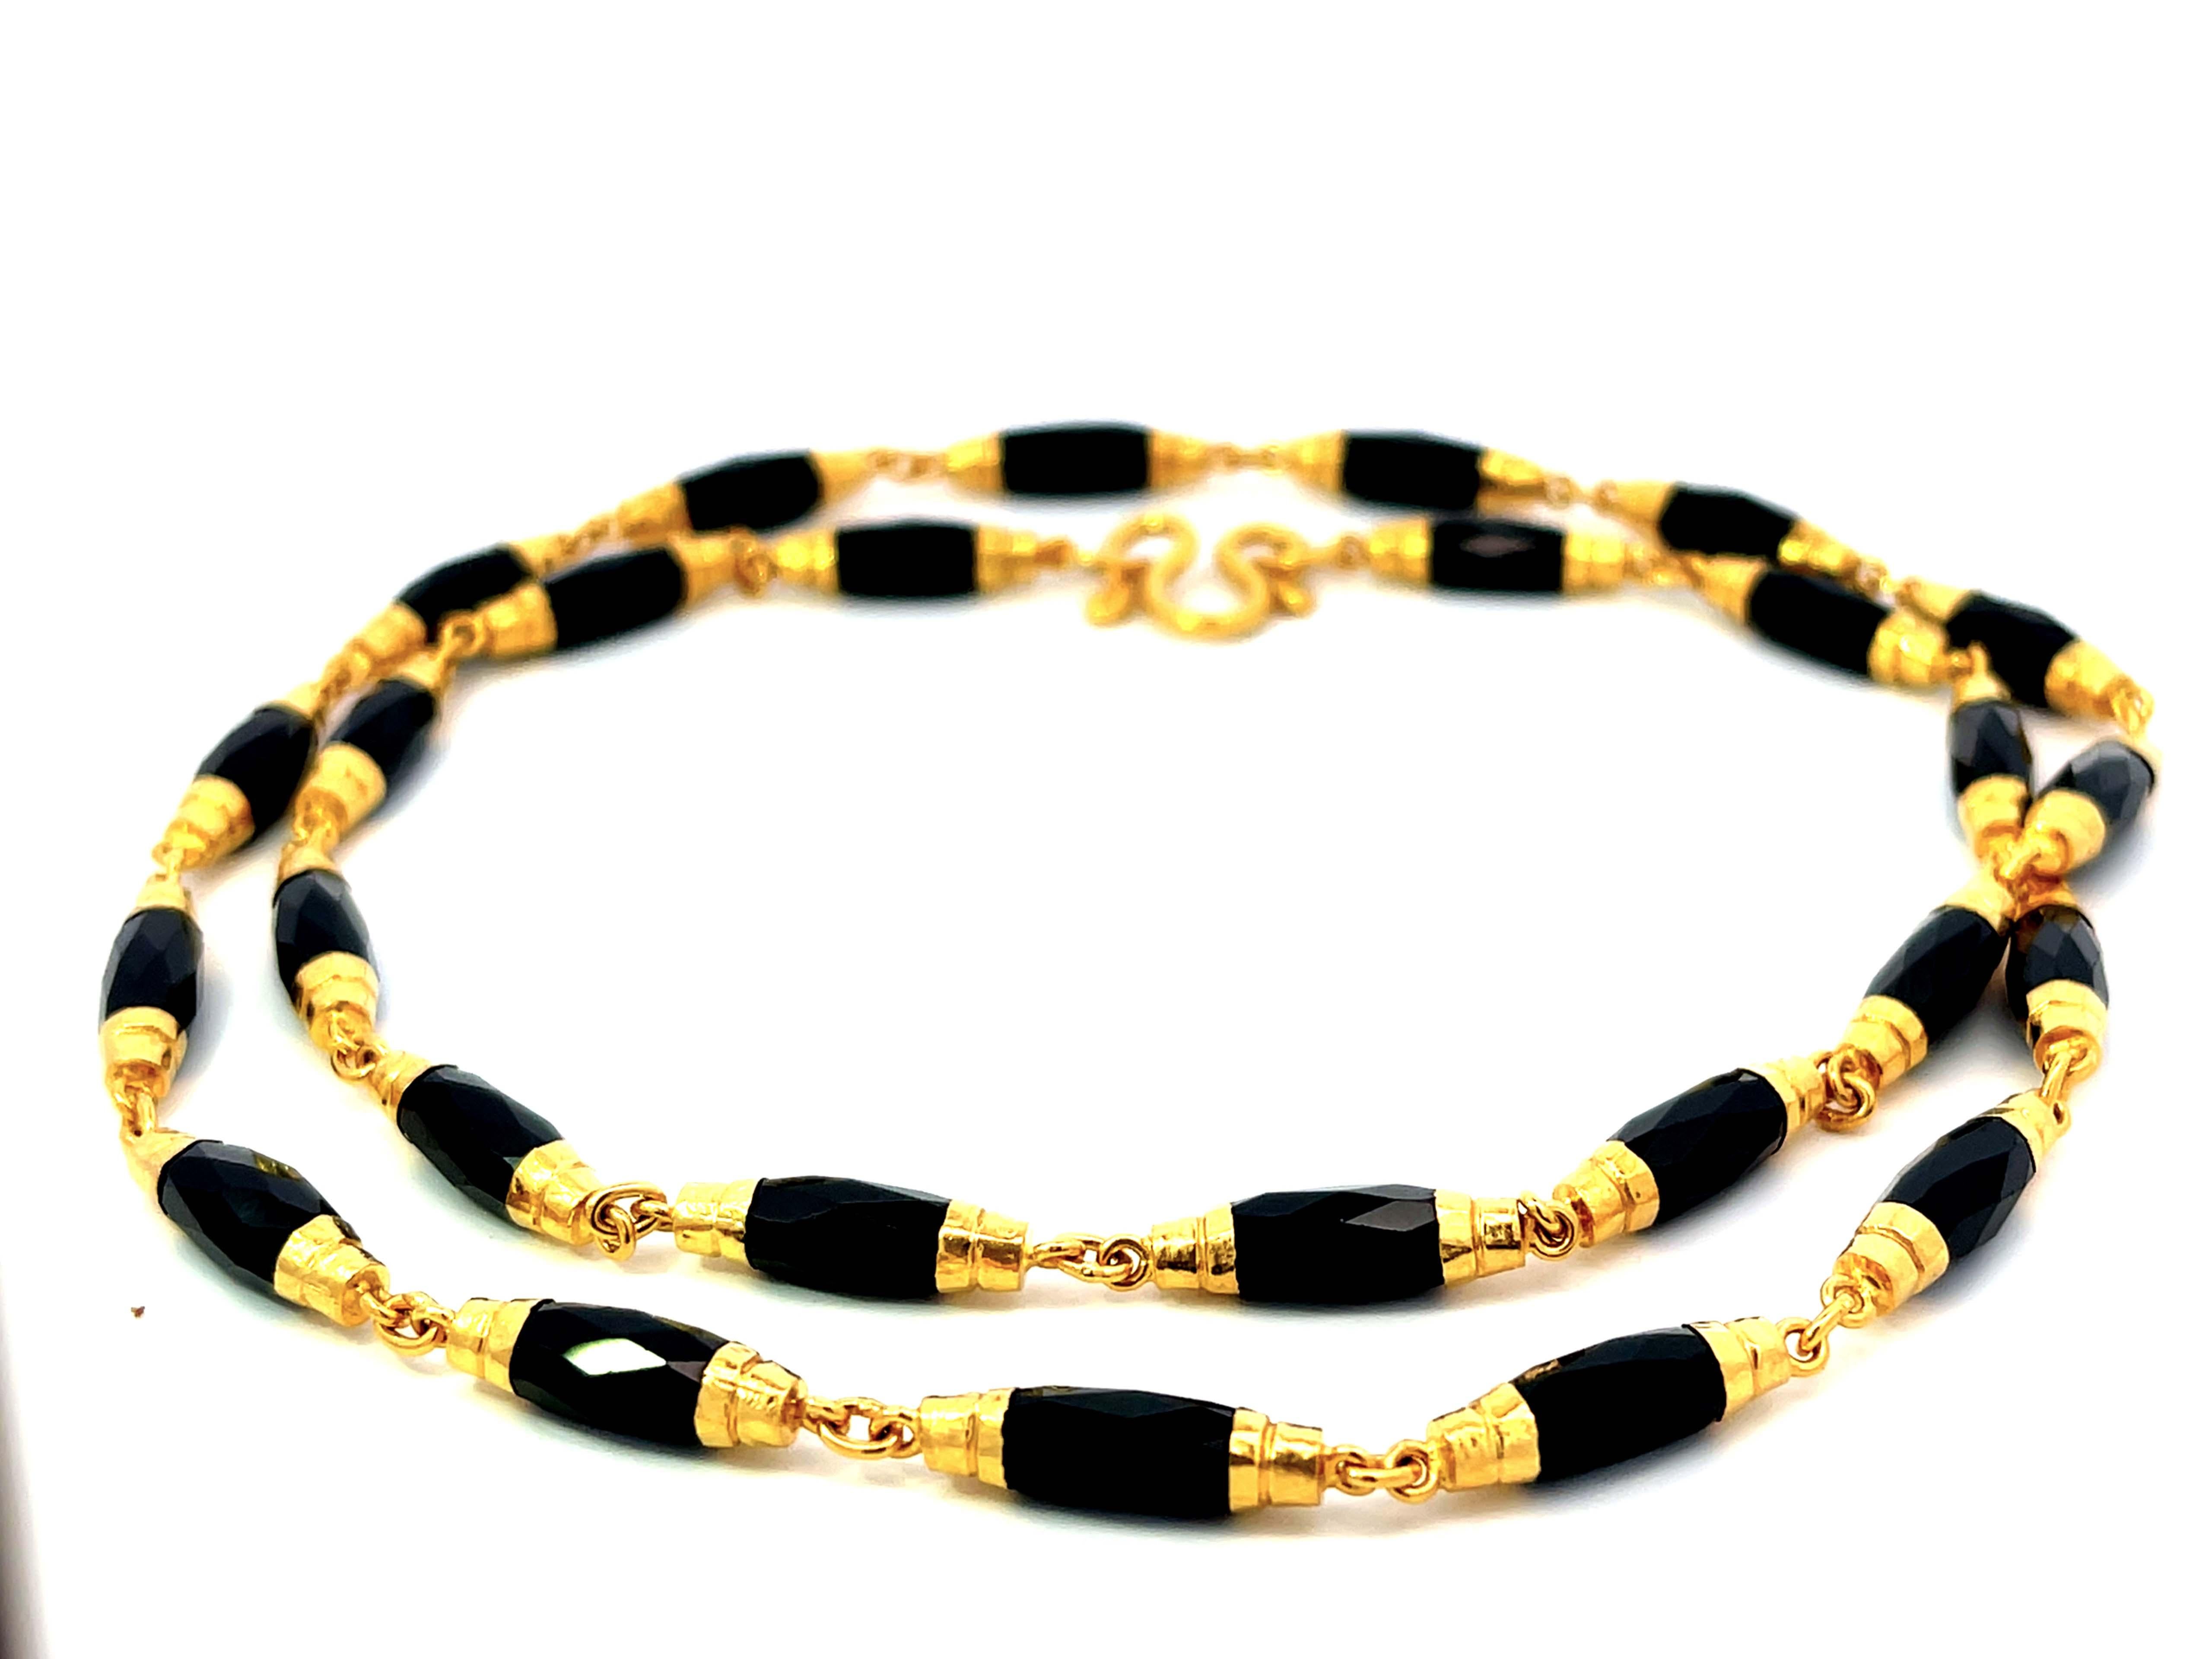 Faceted Black Onyx Gold Beaded Necklace 22k Yellow Gold In Excellent Condition For Sale In Honolulu, HI